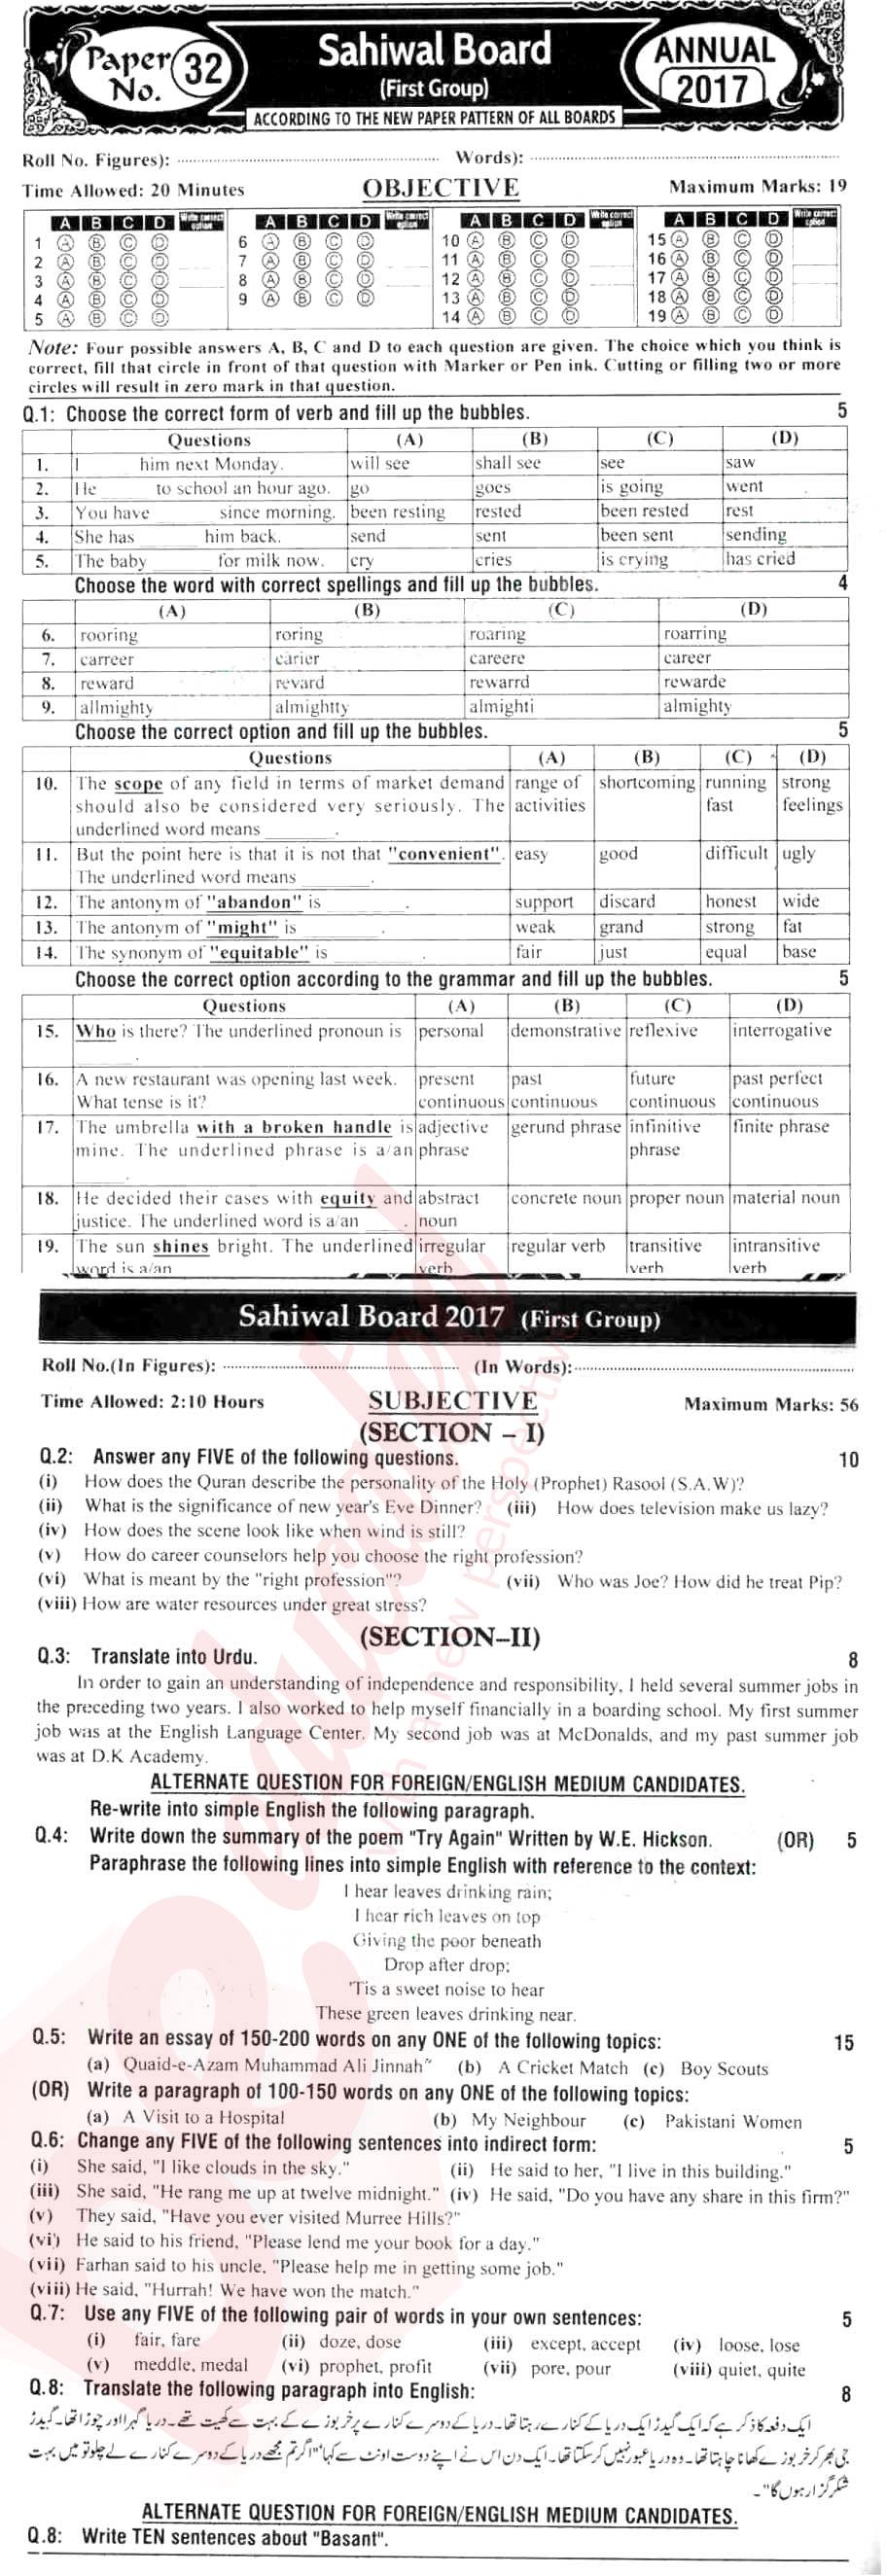 English 10th class Past Paper Group 1 BISE Sahiwal 2017